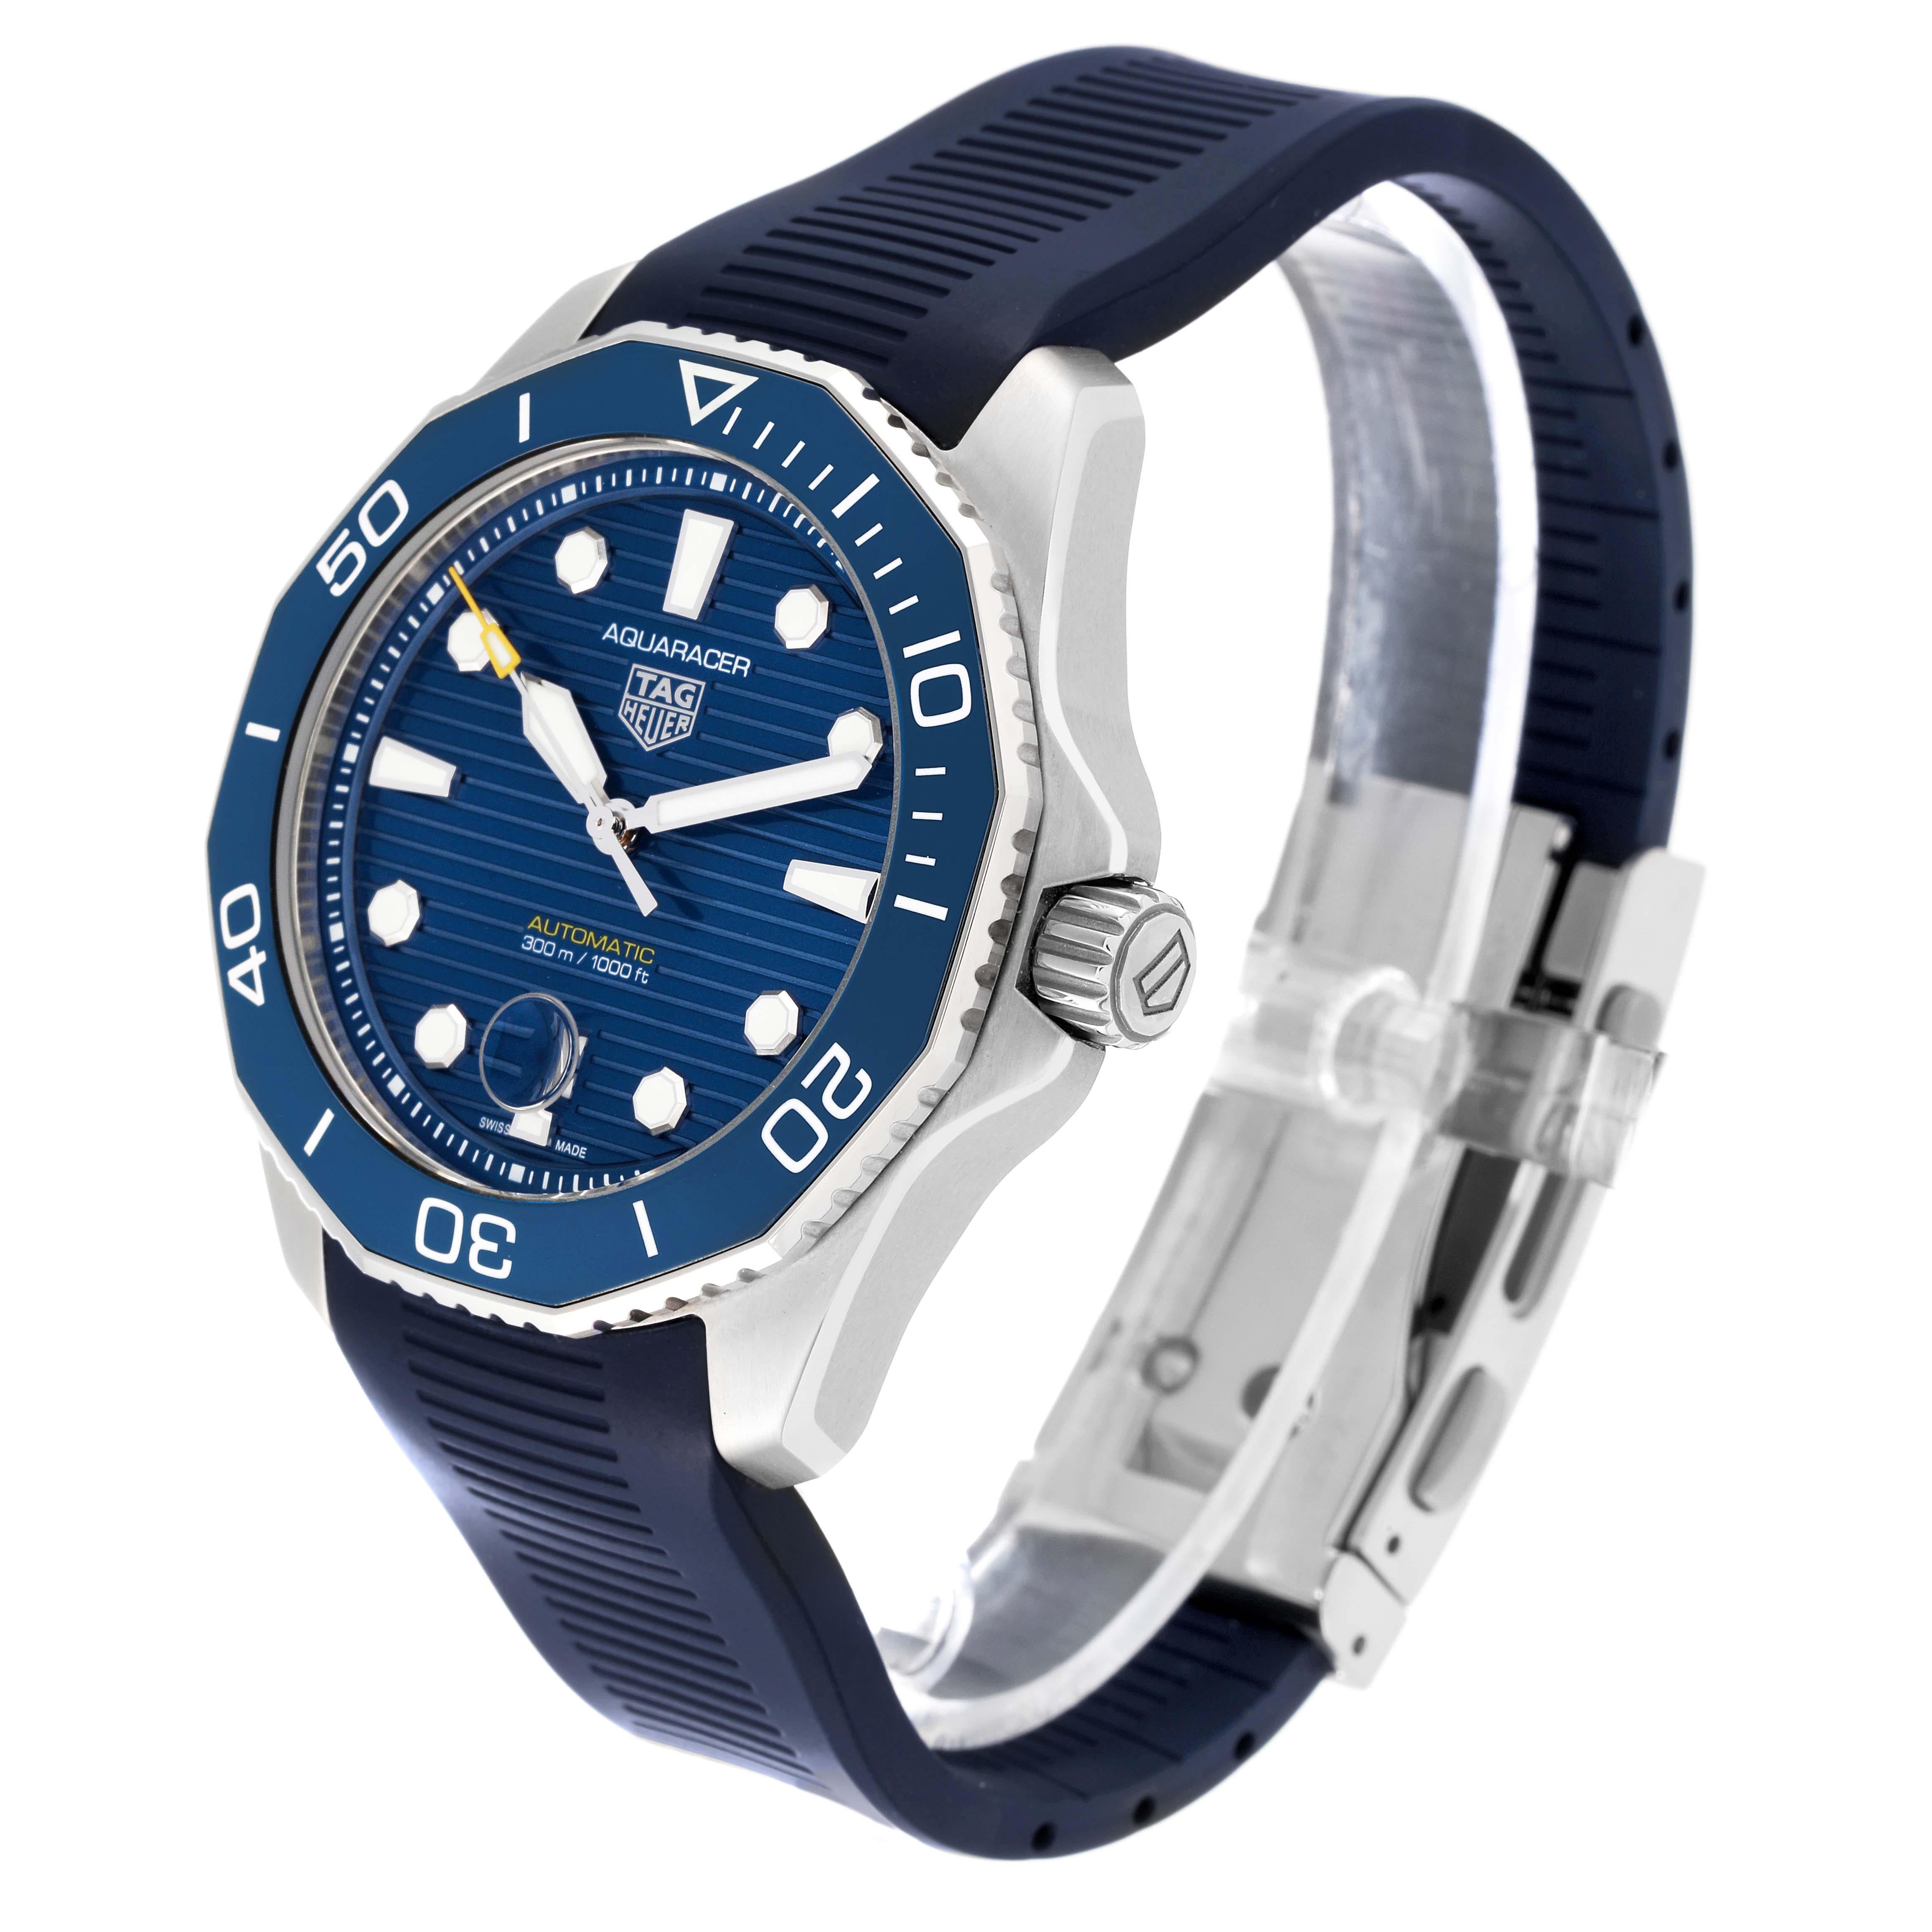 Tag Heuer Aquaracer Professional 300 Blue Dial Steel Mens Watch WBP201B Box Card For Sale 1